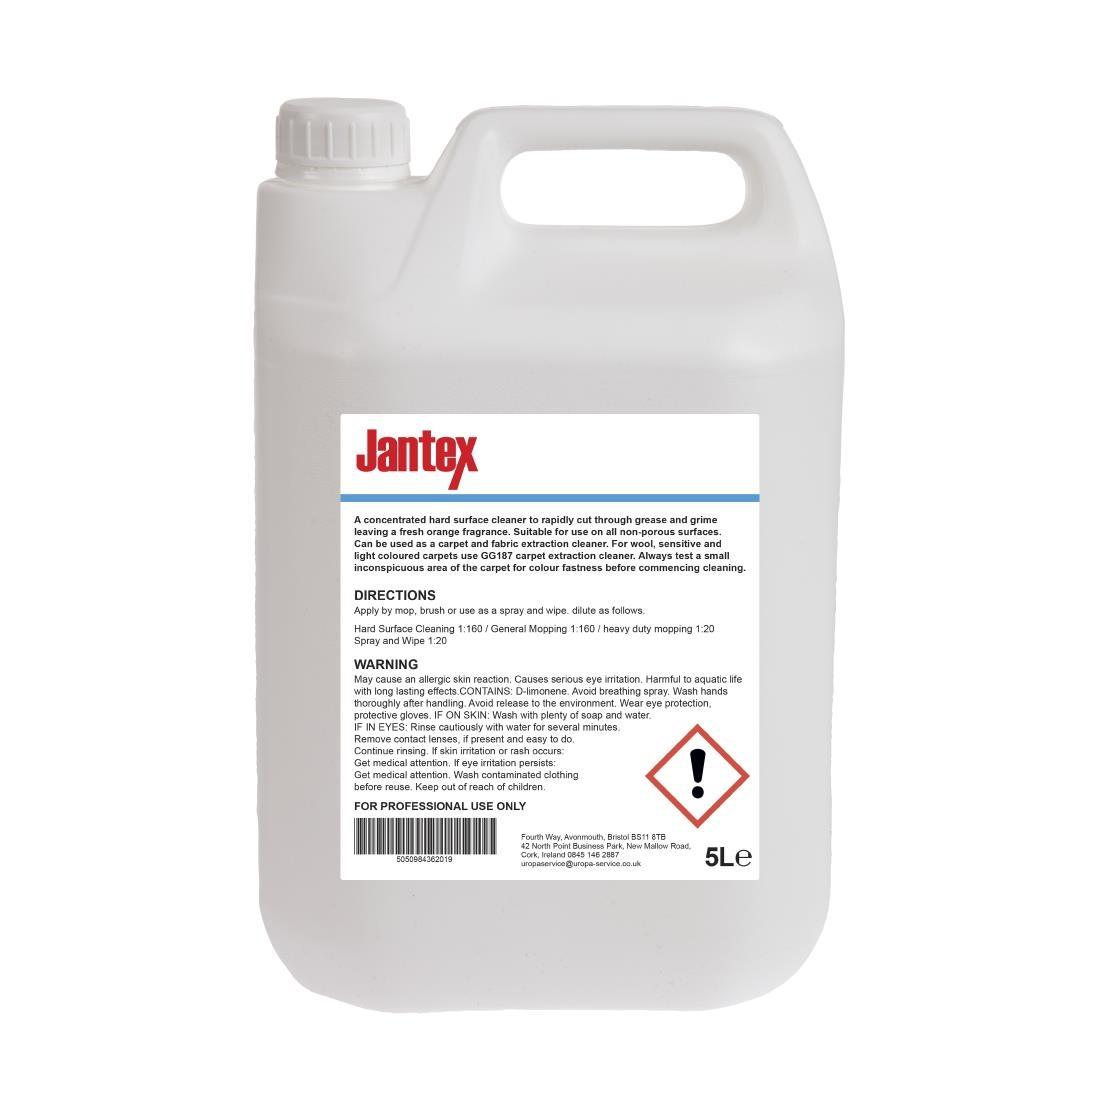 Jantex Citrus Kitchen Cleaner and Degreaser Concentrate 5Ltr (Single Pack) - GG937  - 2